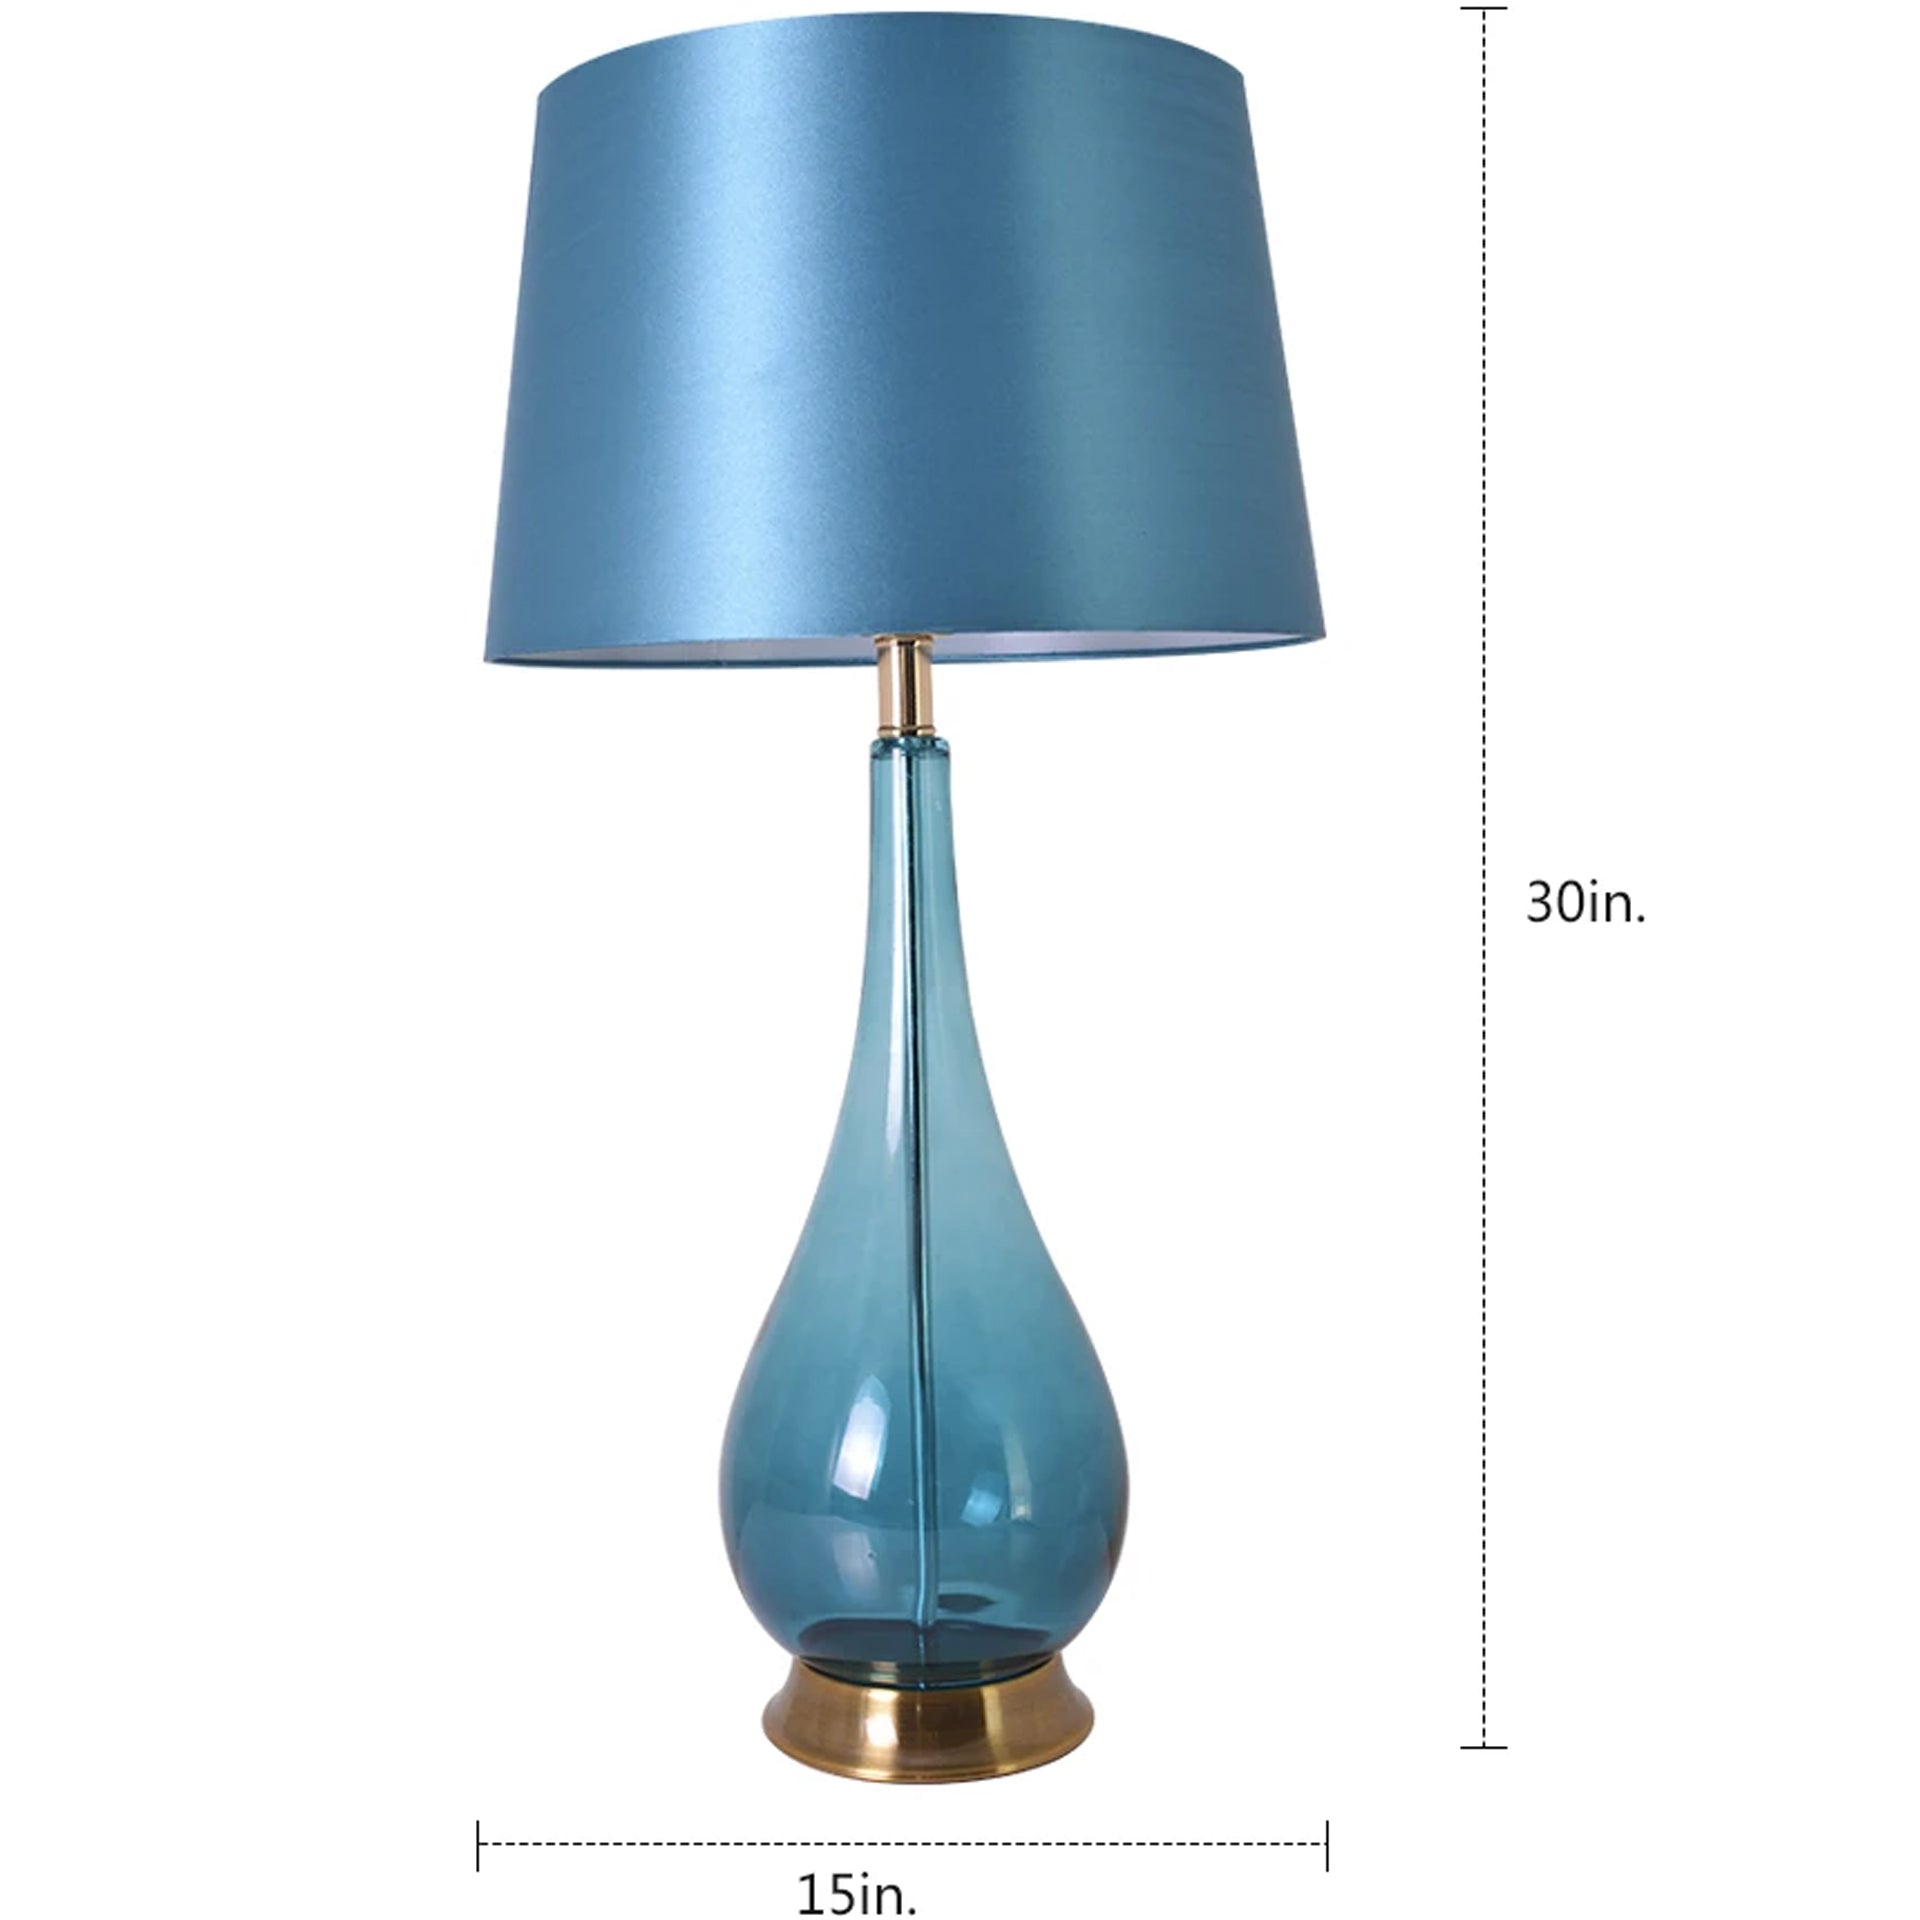 Carro Home Tulip Big Translucent Ombre Glass Table Lamp 30" - Blue Ombre/Blue (Set of 2)